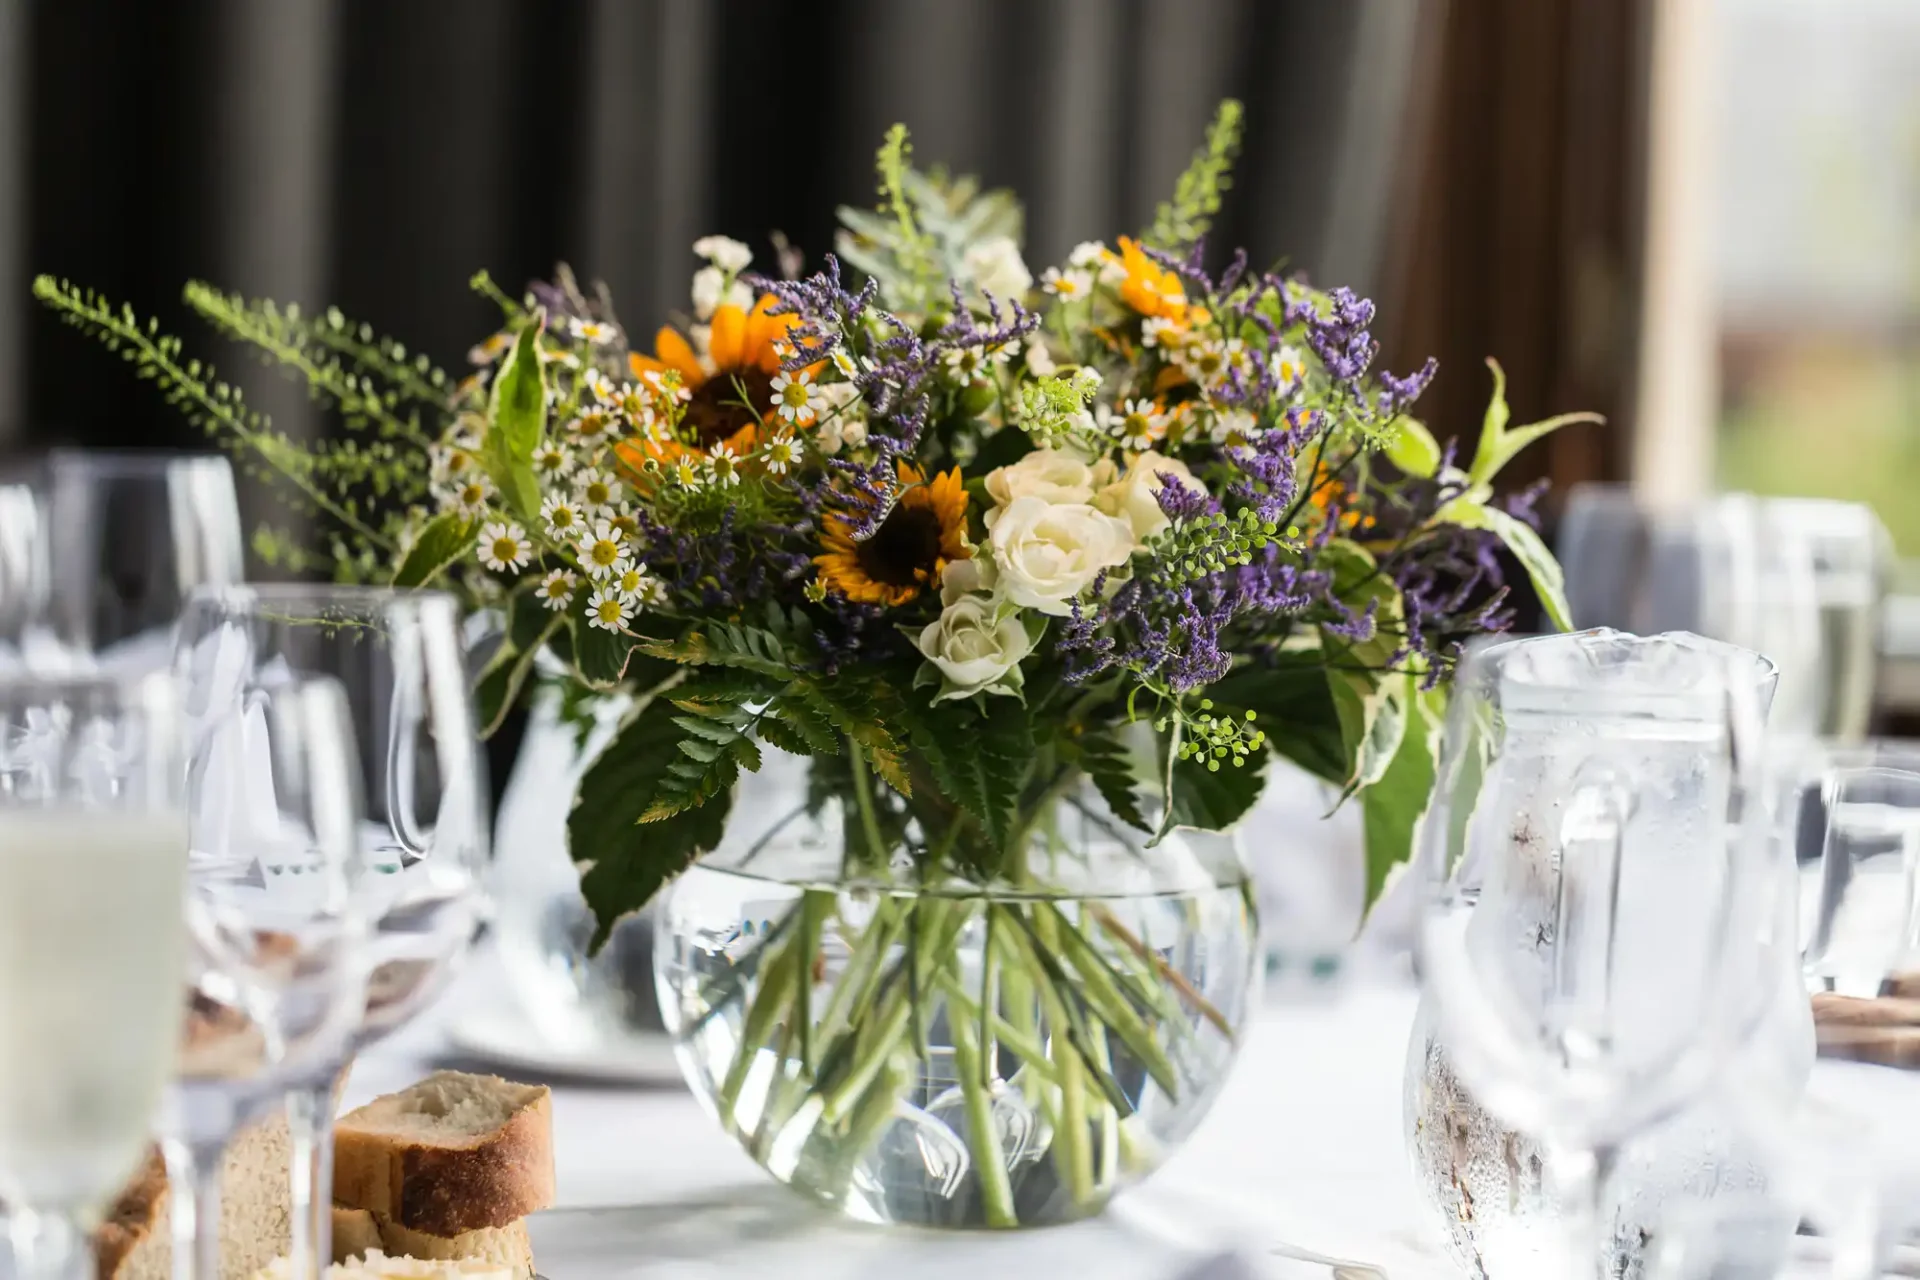 Elegant floral centerpiece in a glass vase with orange, yellow, and purple flowers on a dining table with glasses and bread.